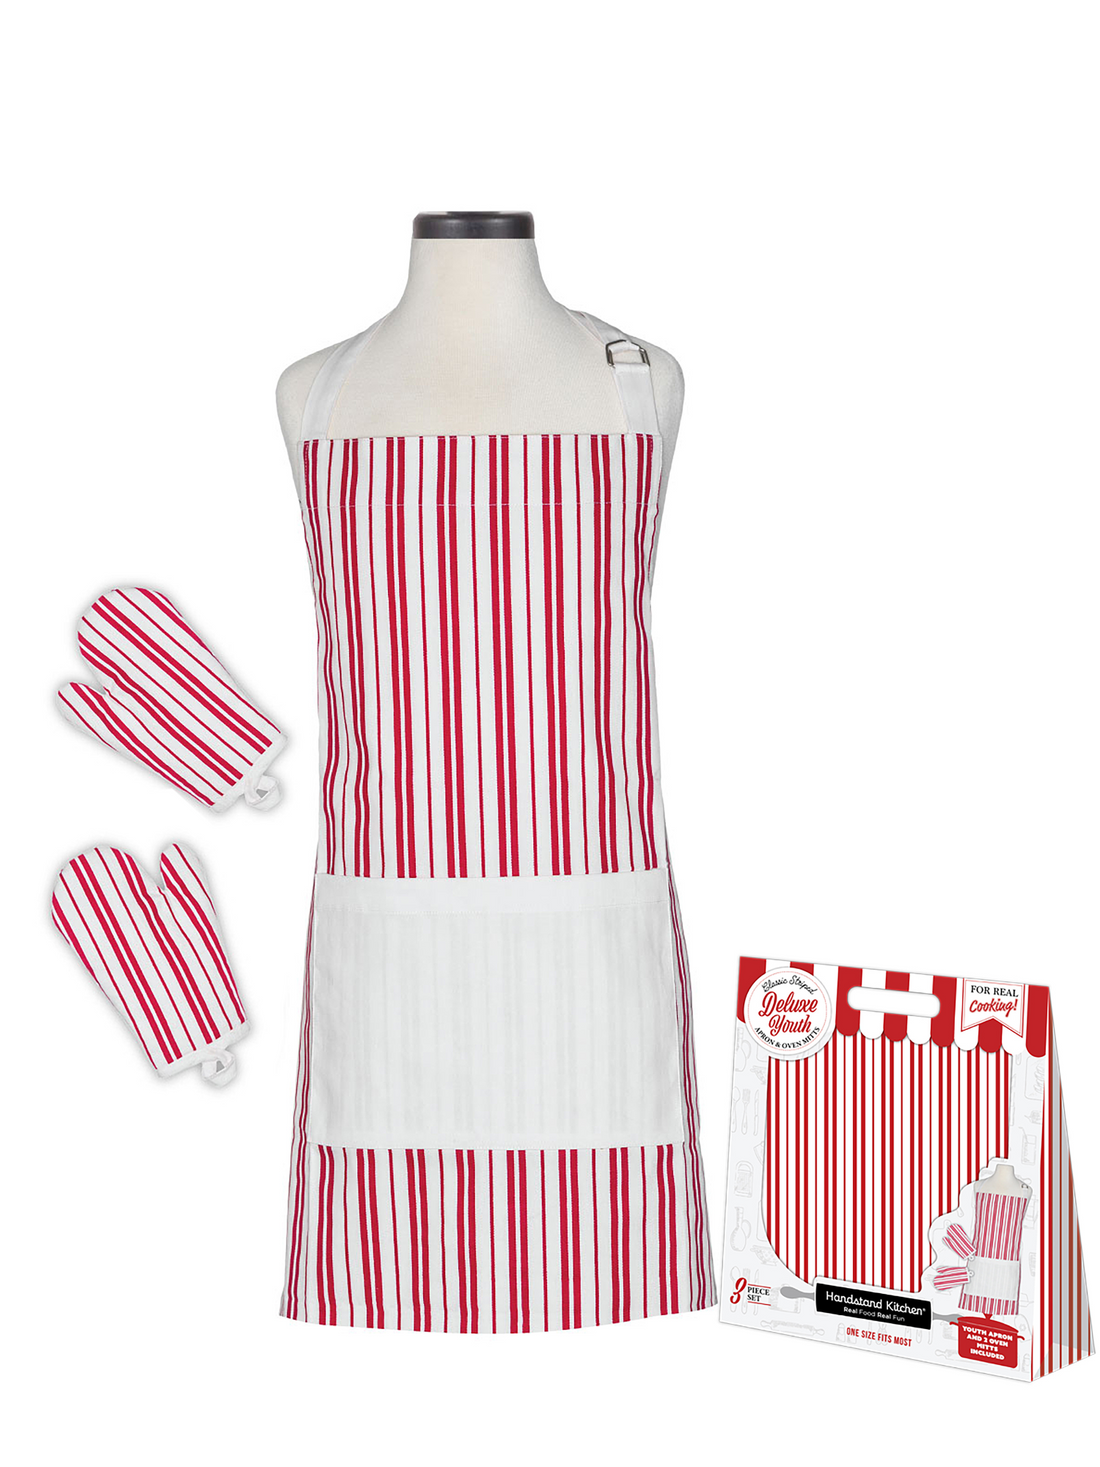 Classic Striped Deluxe Youth Apron and Oven Mitt Boxed Set